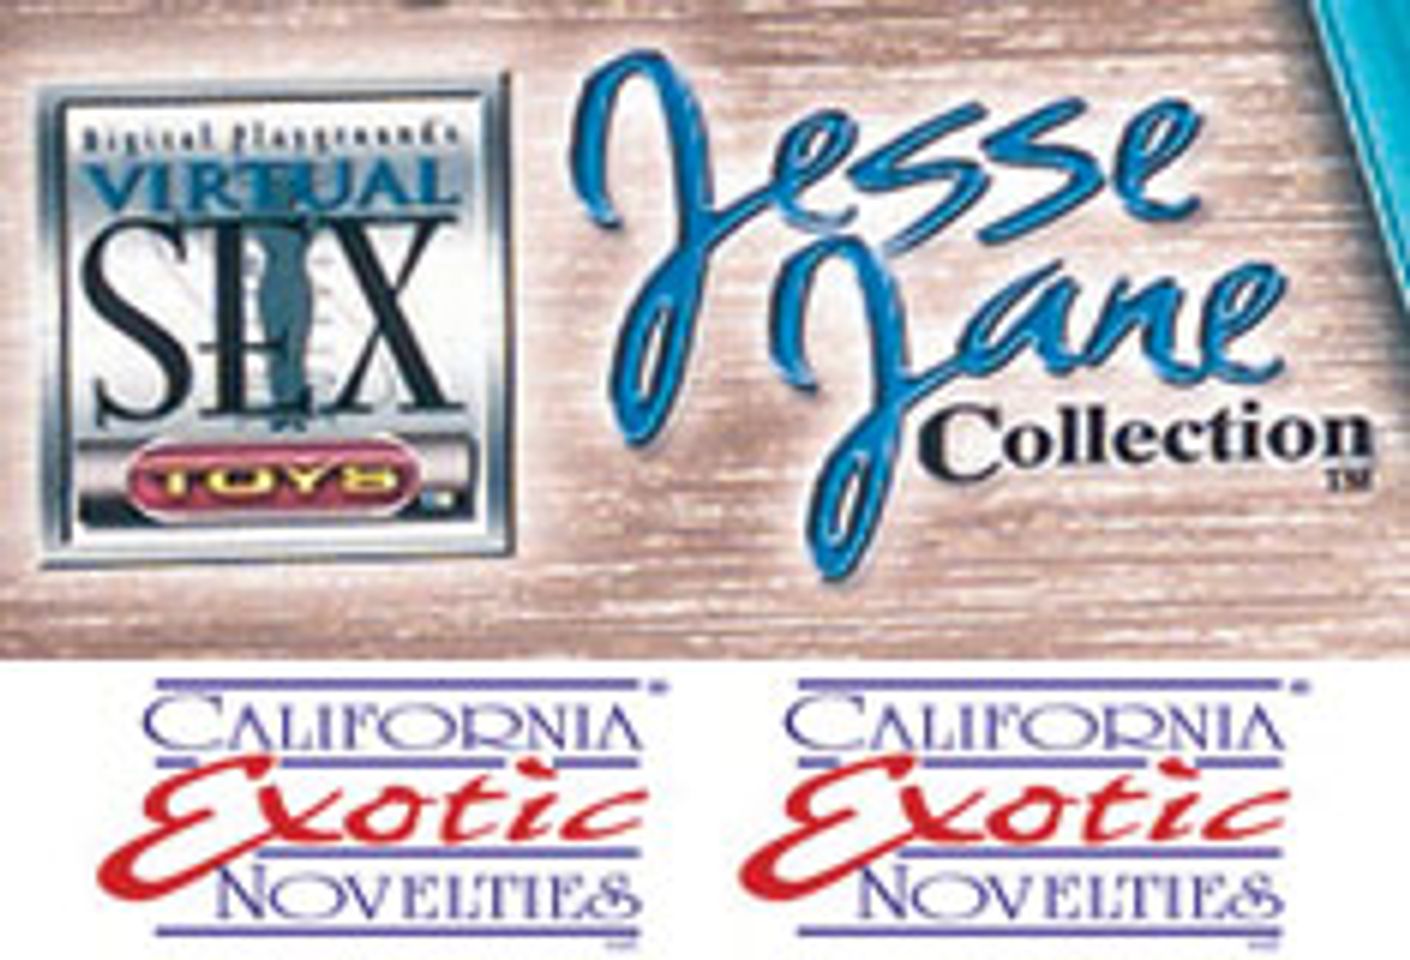 Jesse Jane Signature Series From Cal Exotic Now Available; New Items Coming Soon